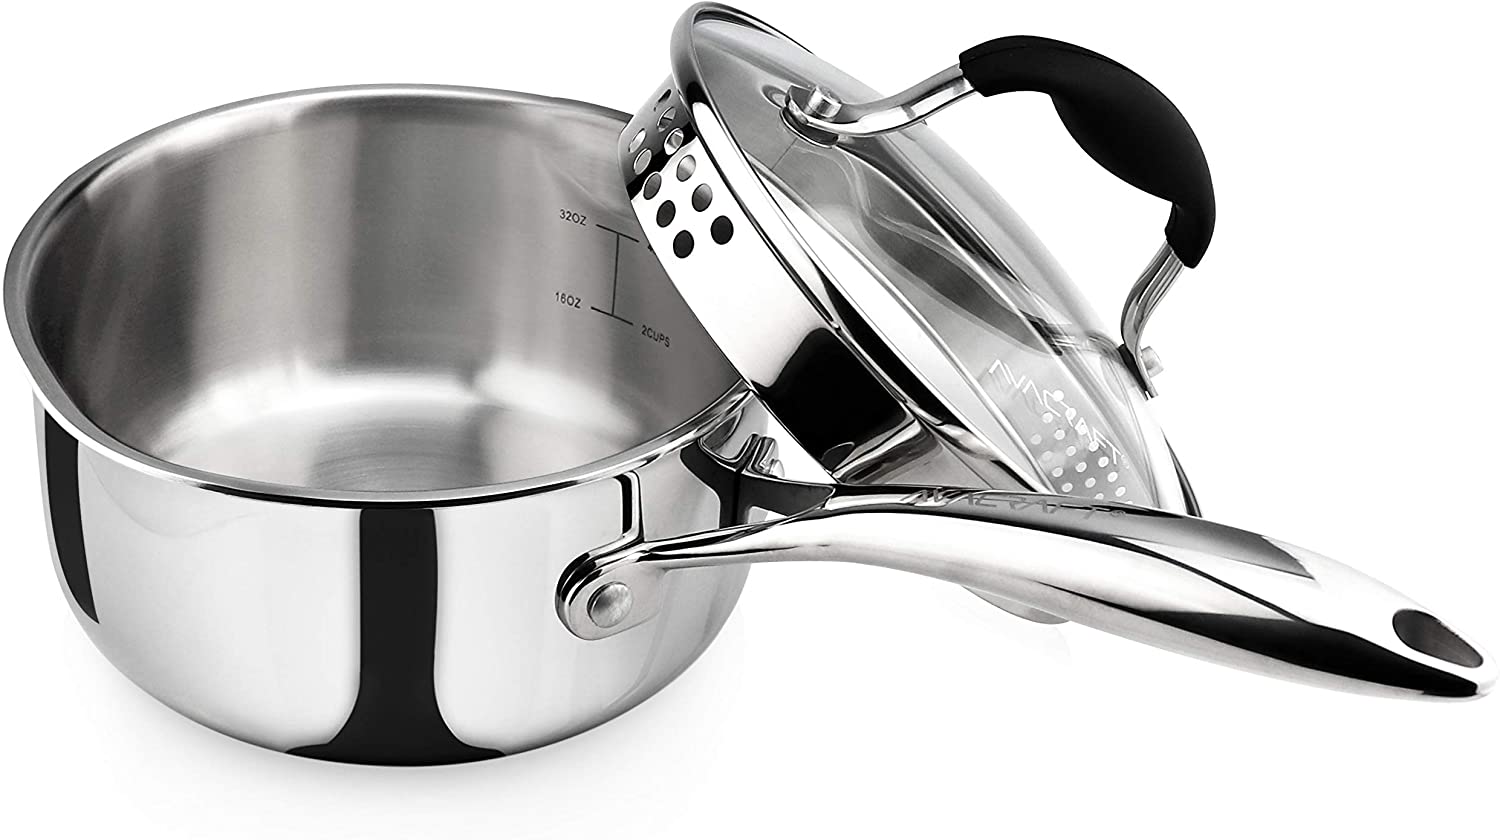 AVACRAFT Top Rated Tri-Ply Stainless Steel Saucepan with Glass Strainer Lid, Two Side Spouts, Ergonomic Handle, Multipurpose